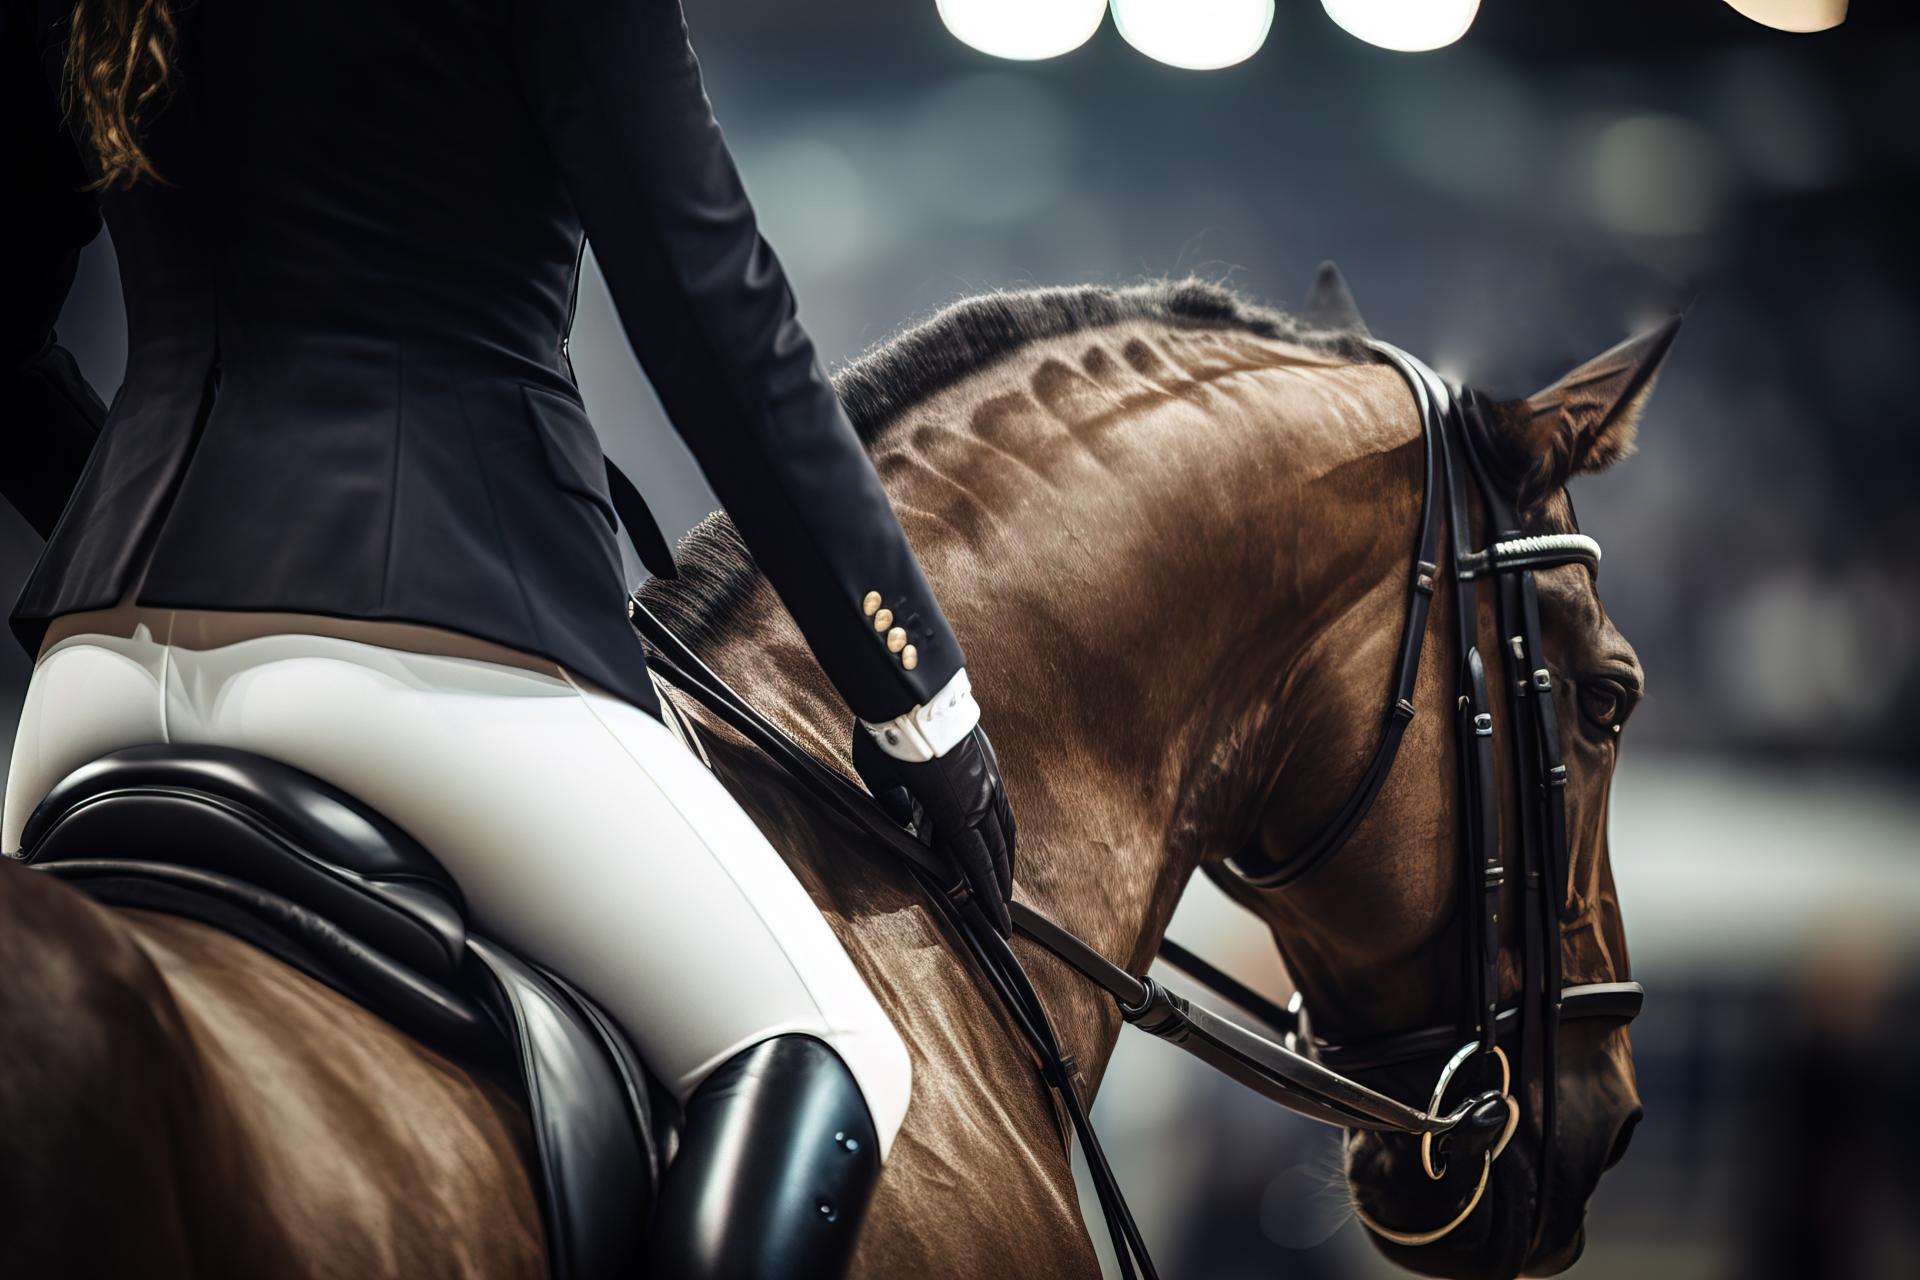 The world of equestrianism gathers in Paris